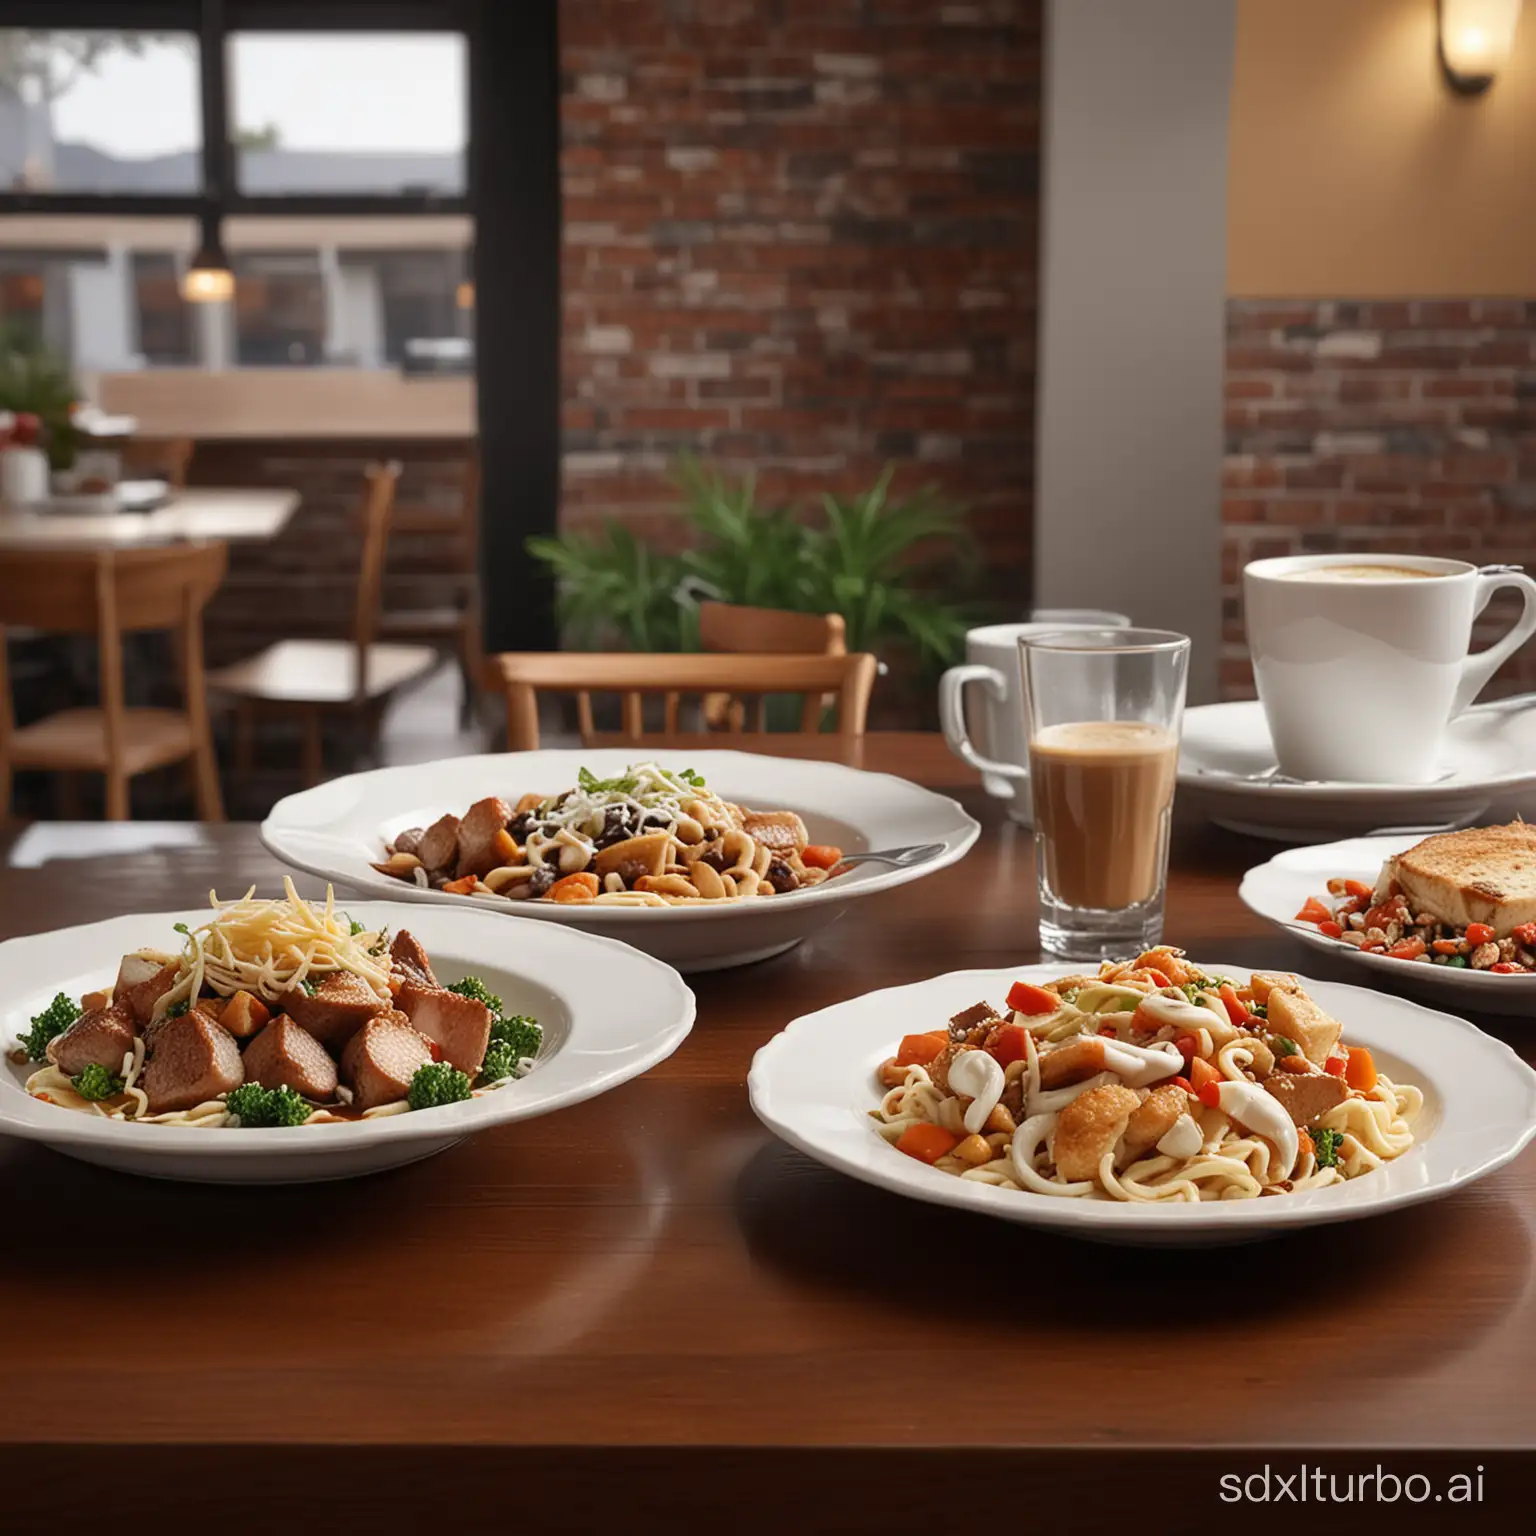 Studio-Photography-of-Dinner-Dishes-with-Coffee-House-Background